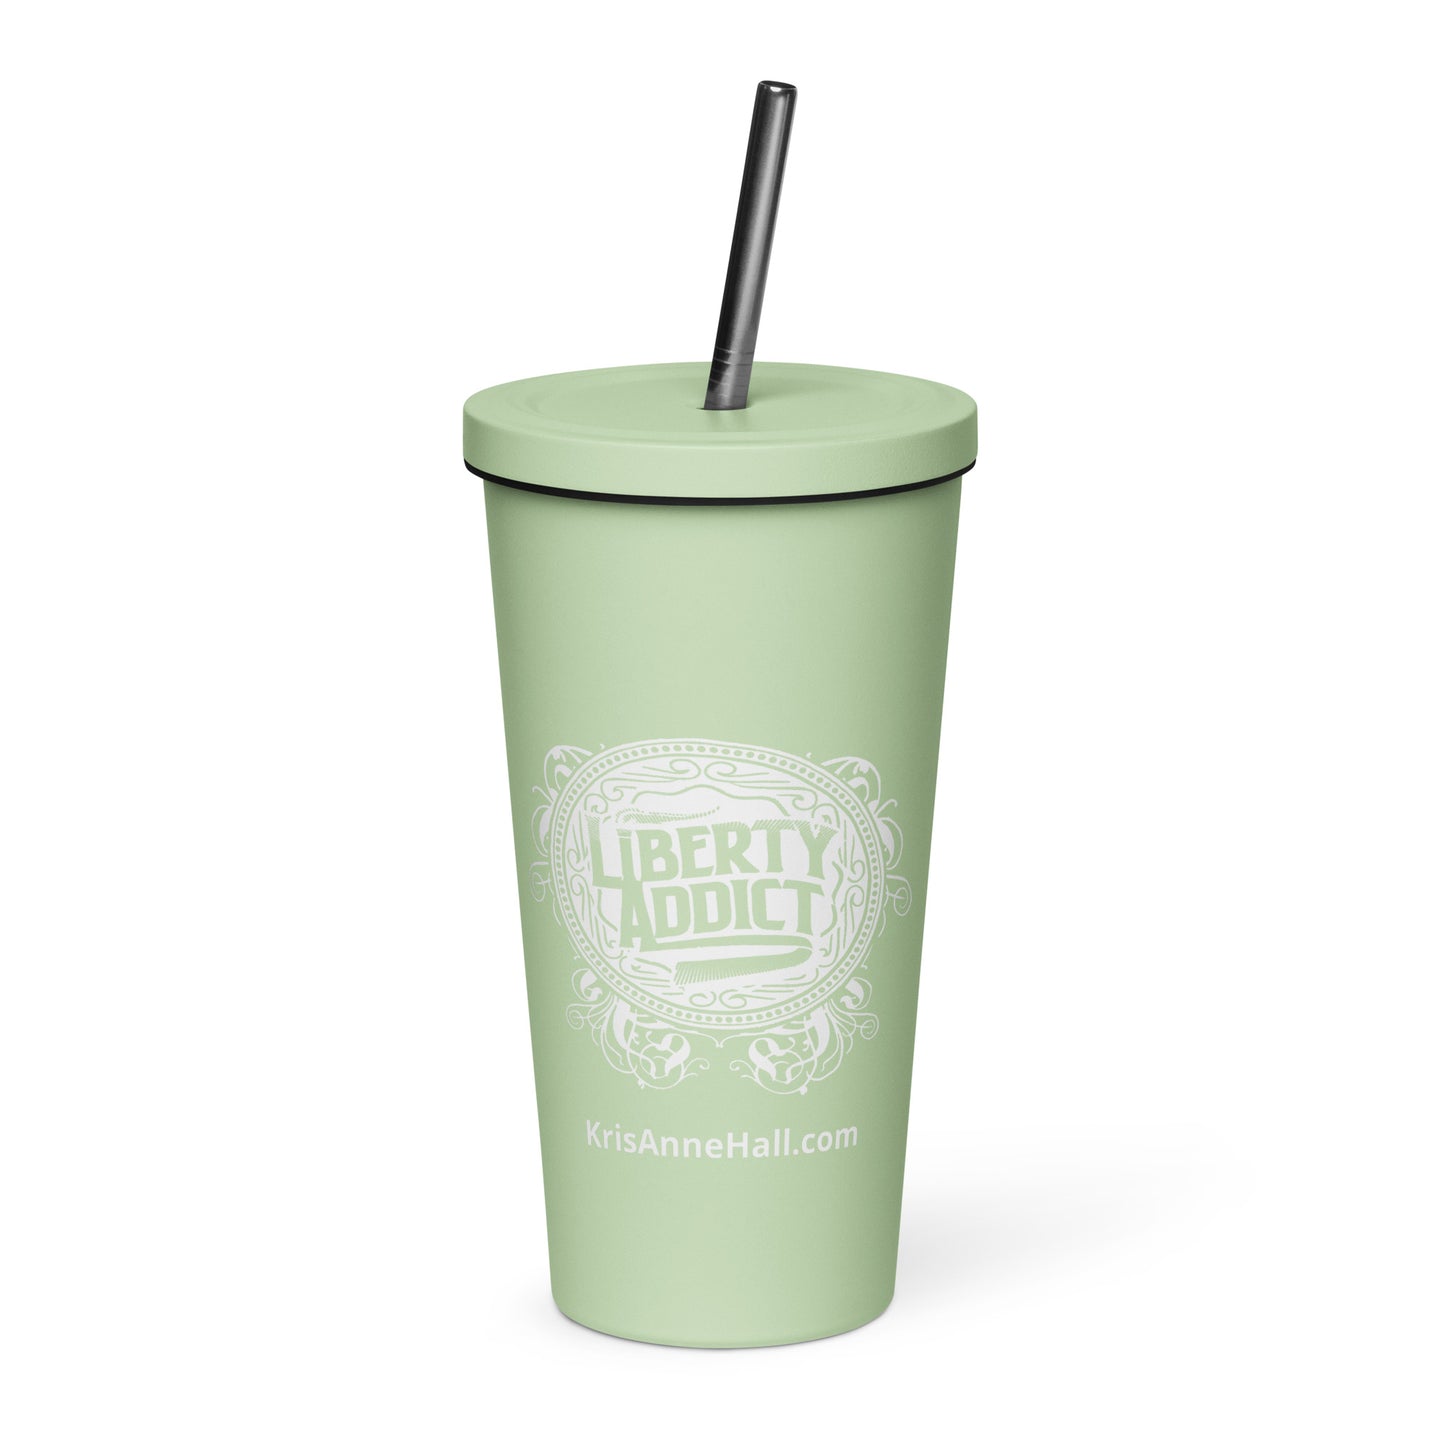 Liberty Addict Insulated tumbler with a straw